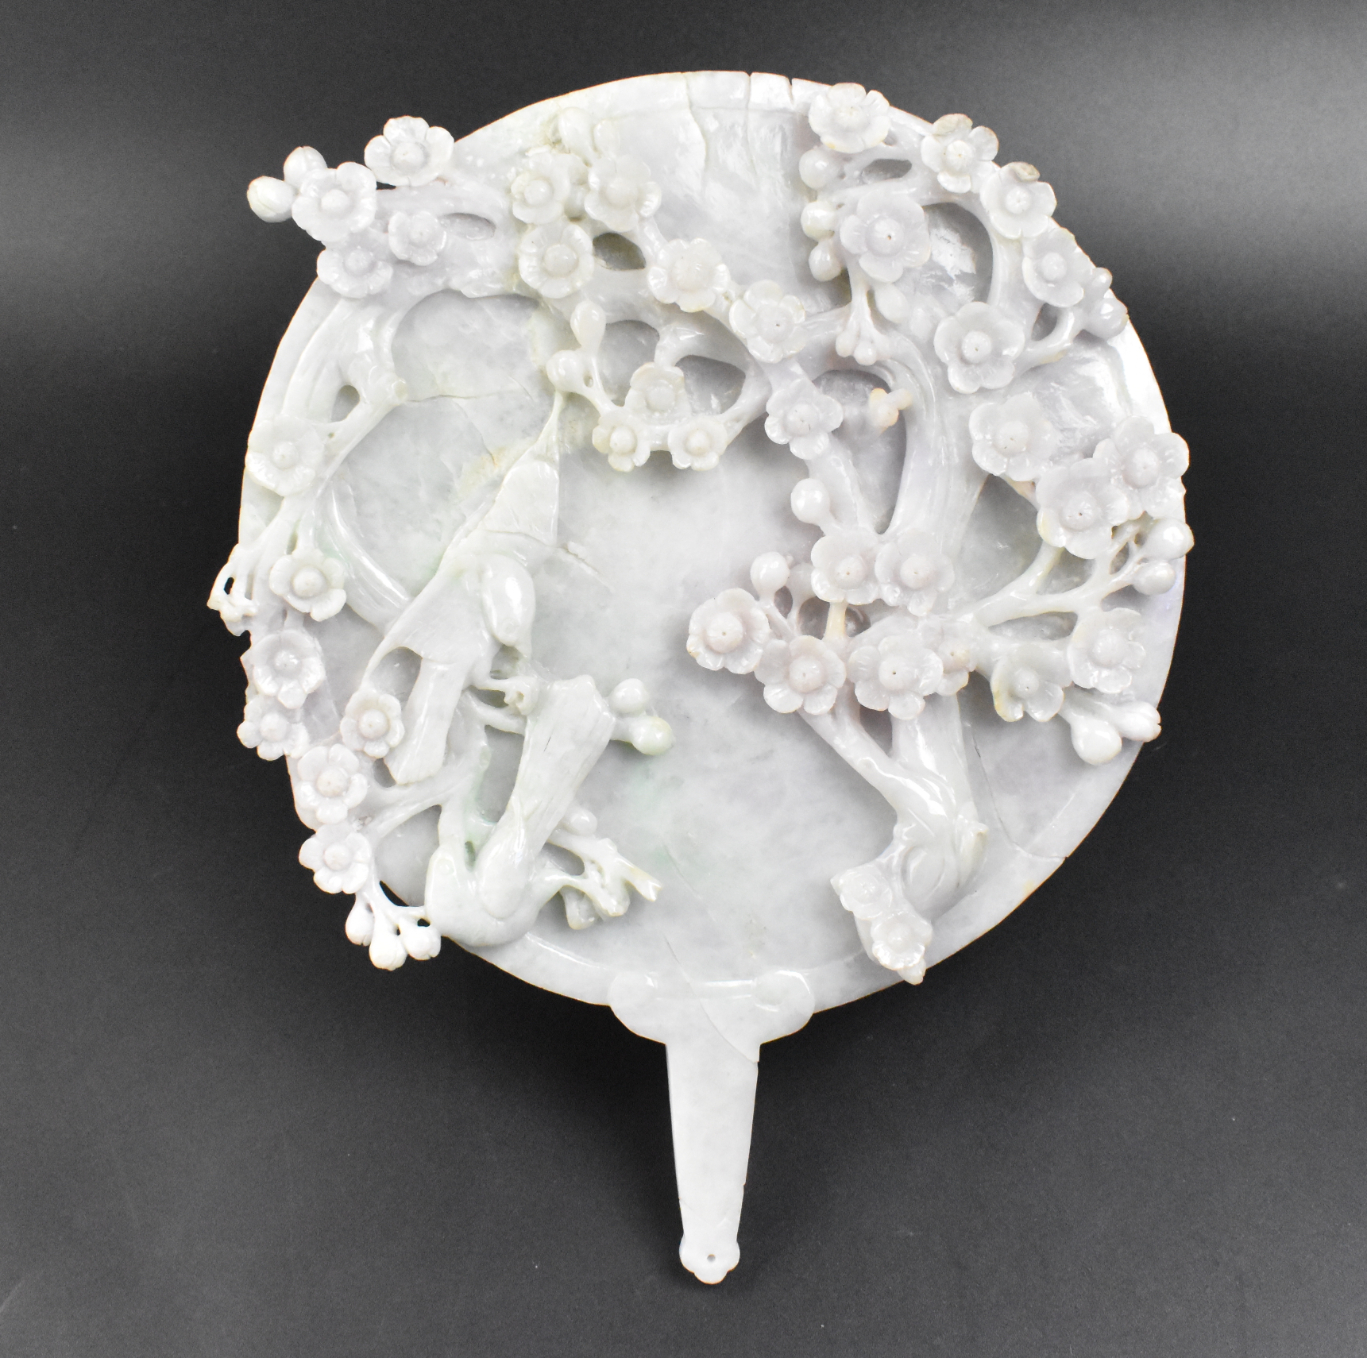 A CHINESE FAN SHAPED JADEITE CARVING